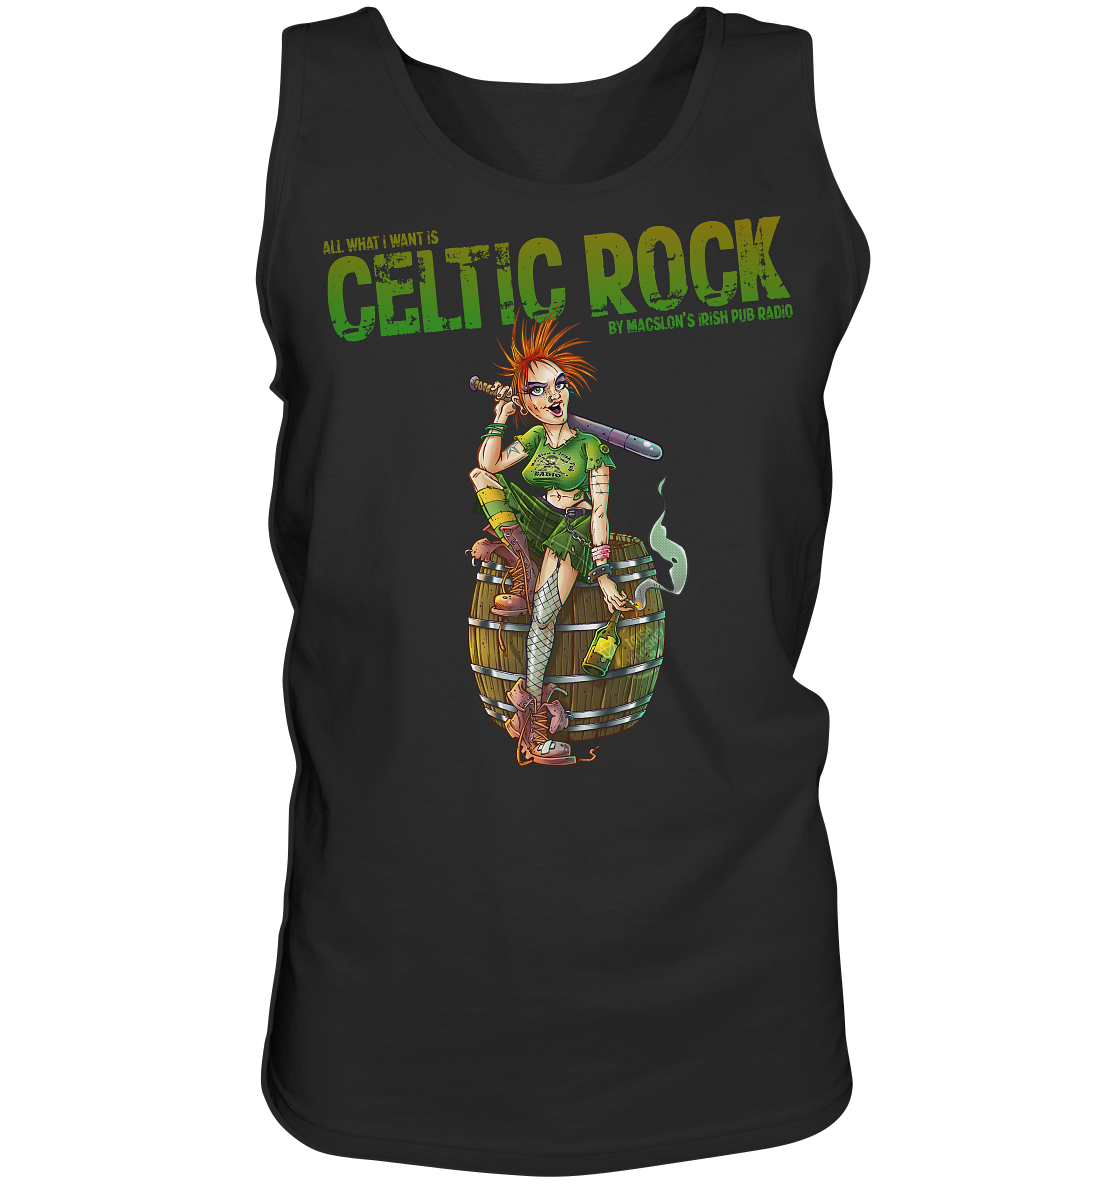 All What I Want Is "Celtic Rock" - Tank-Top